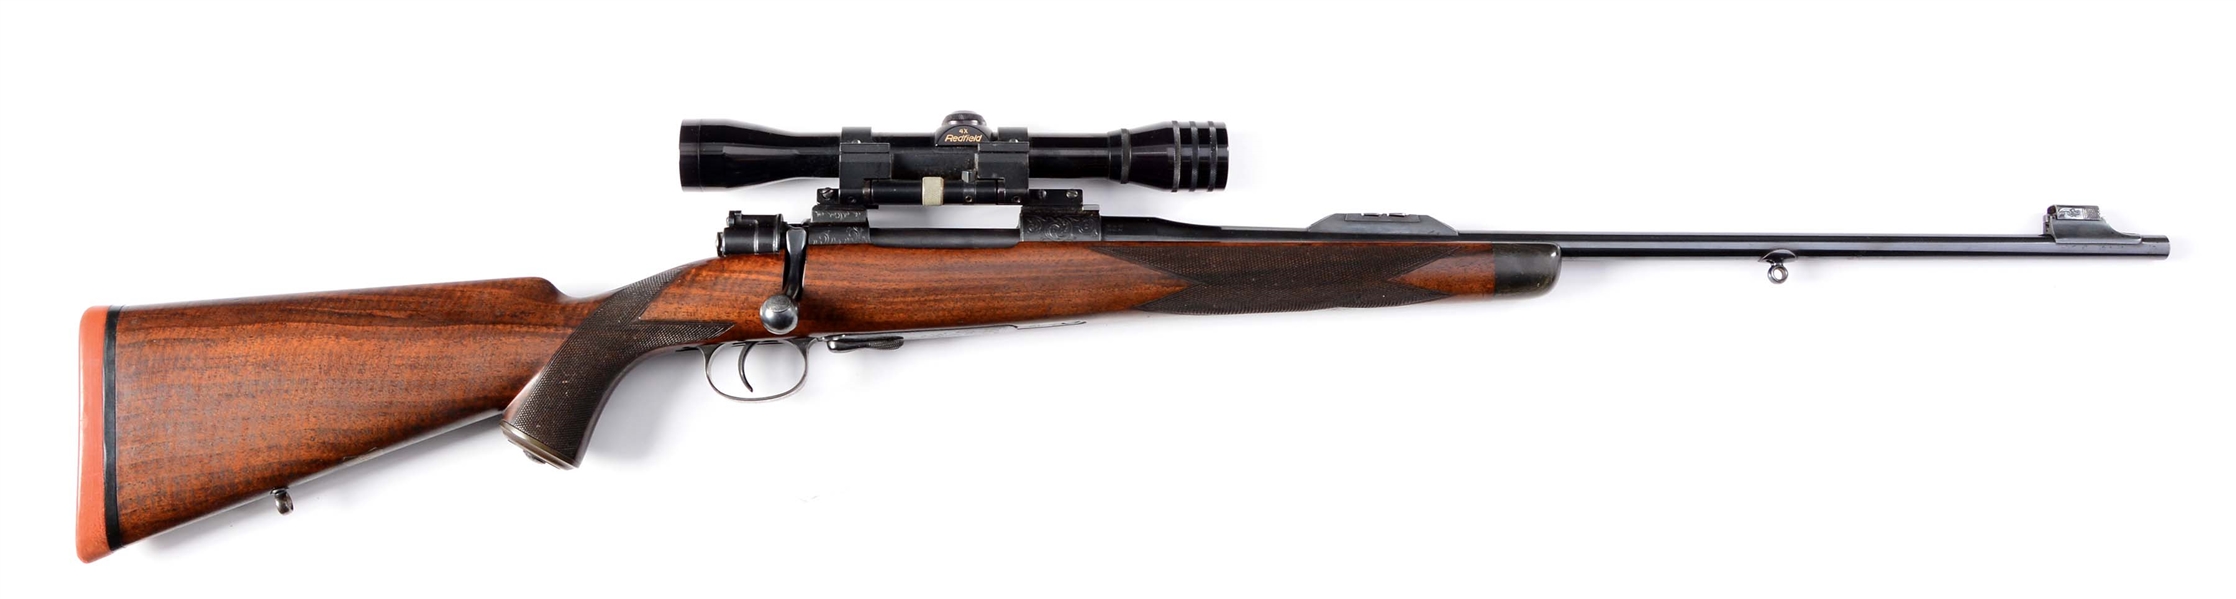 (C) WESTLEY RICHARDS DELUXE MODEL 98 RIFLE WITH SCOPE (CIRCA 1953).